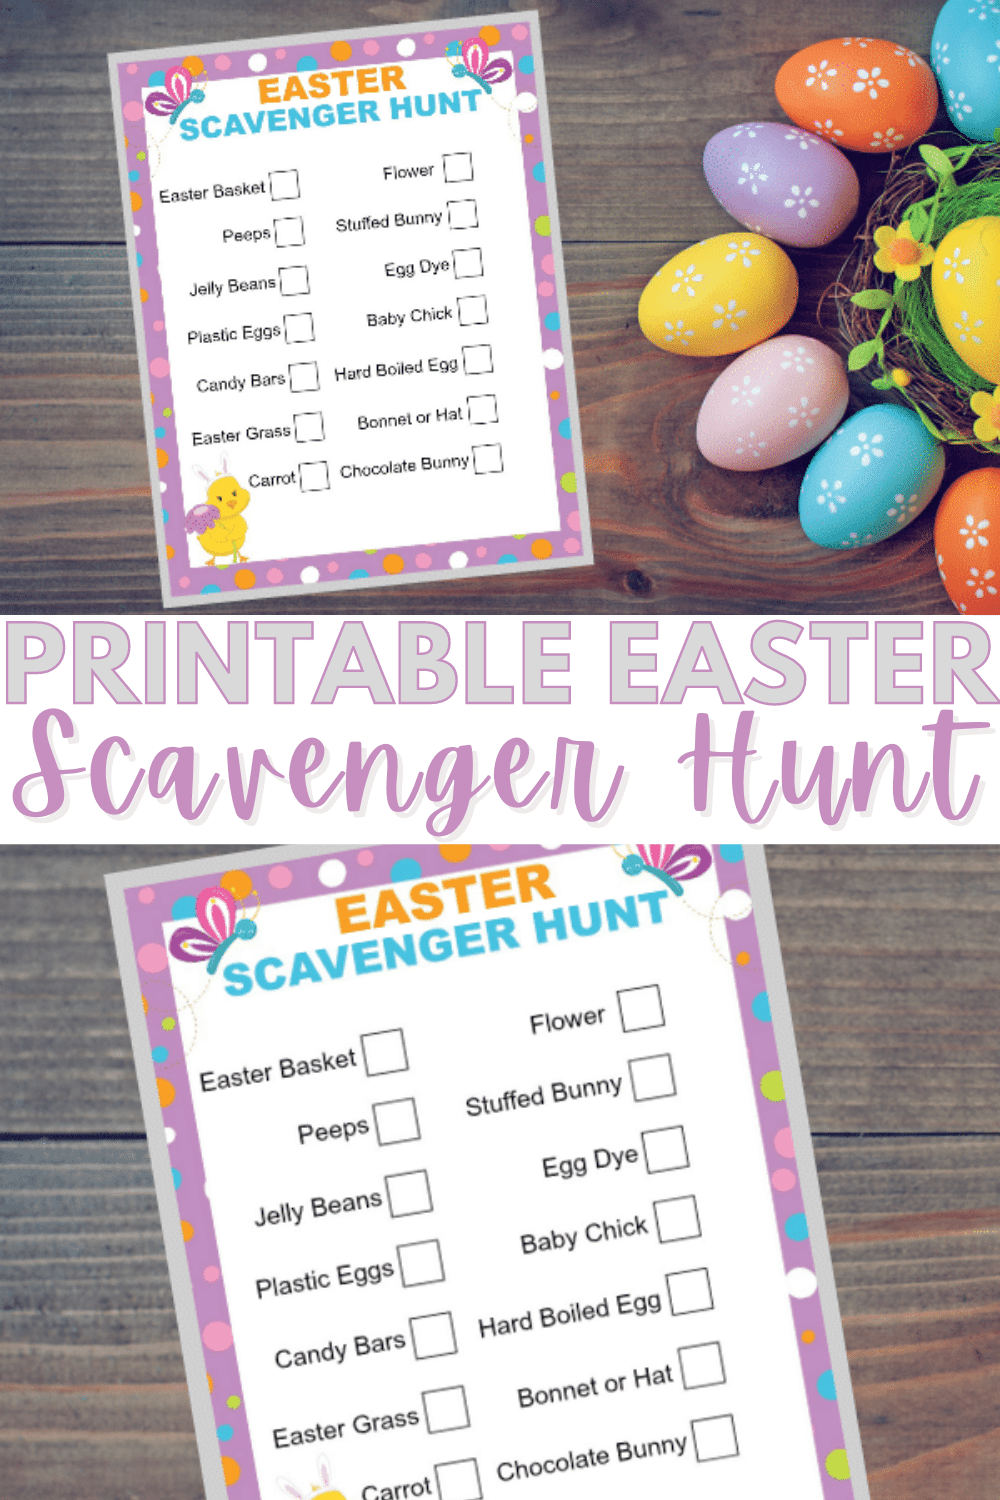 This free printable Easter Scavenger Hunt is fun for the whole family and the perfect way to spend a beautiful spring day. #easter #printables #scavengerhunt via @wondermomwannab